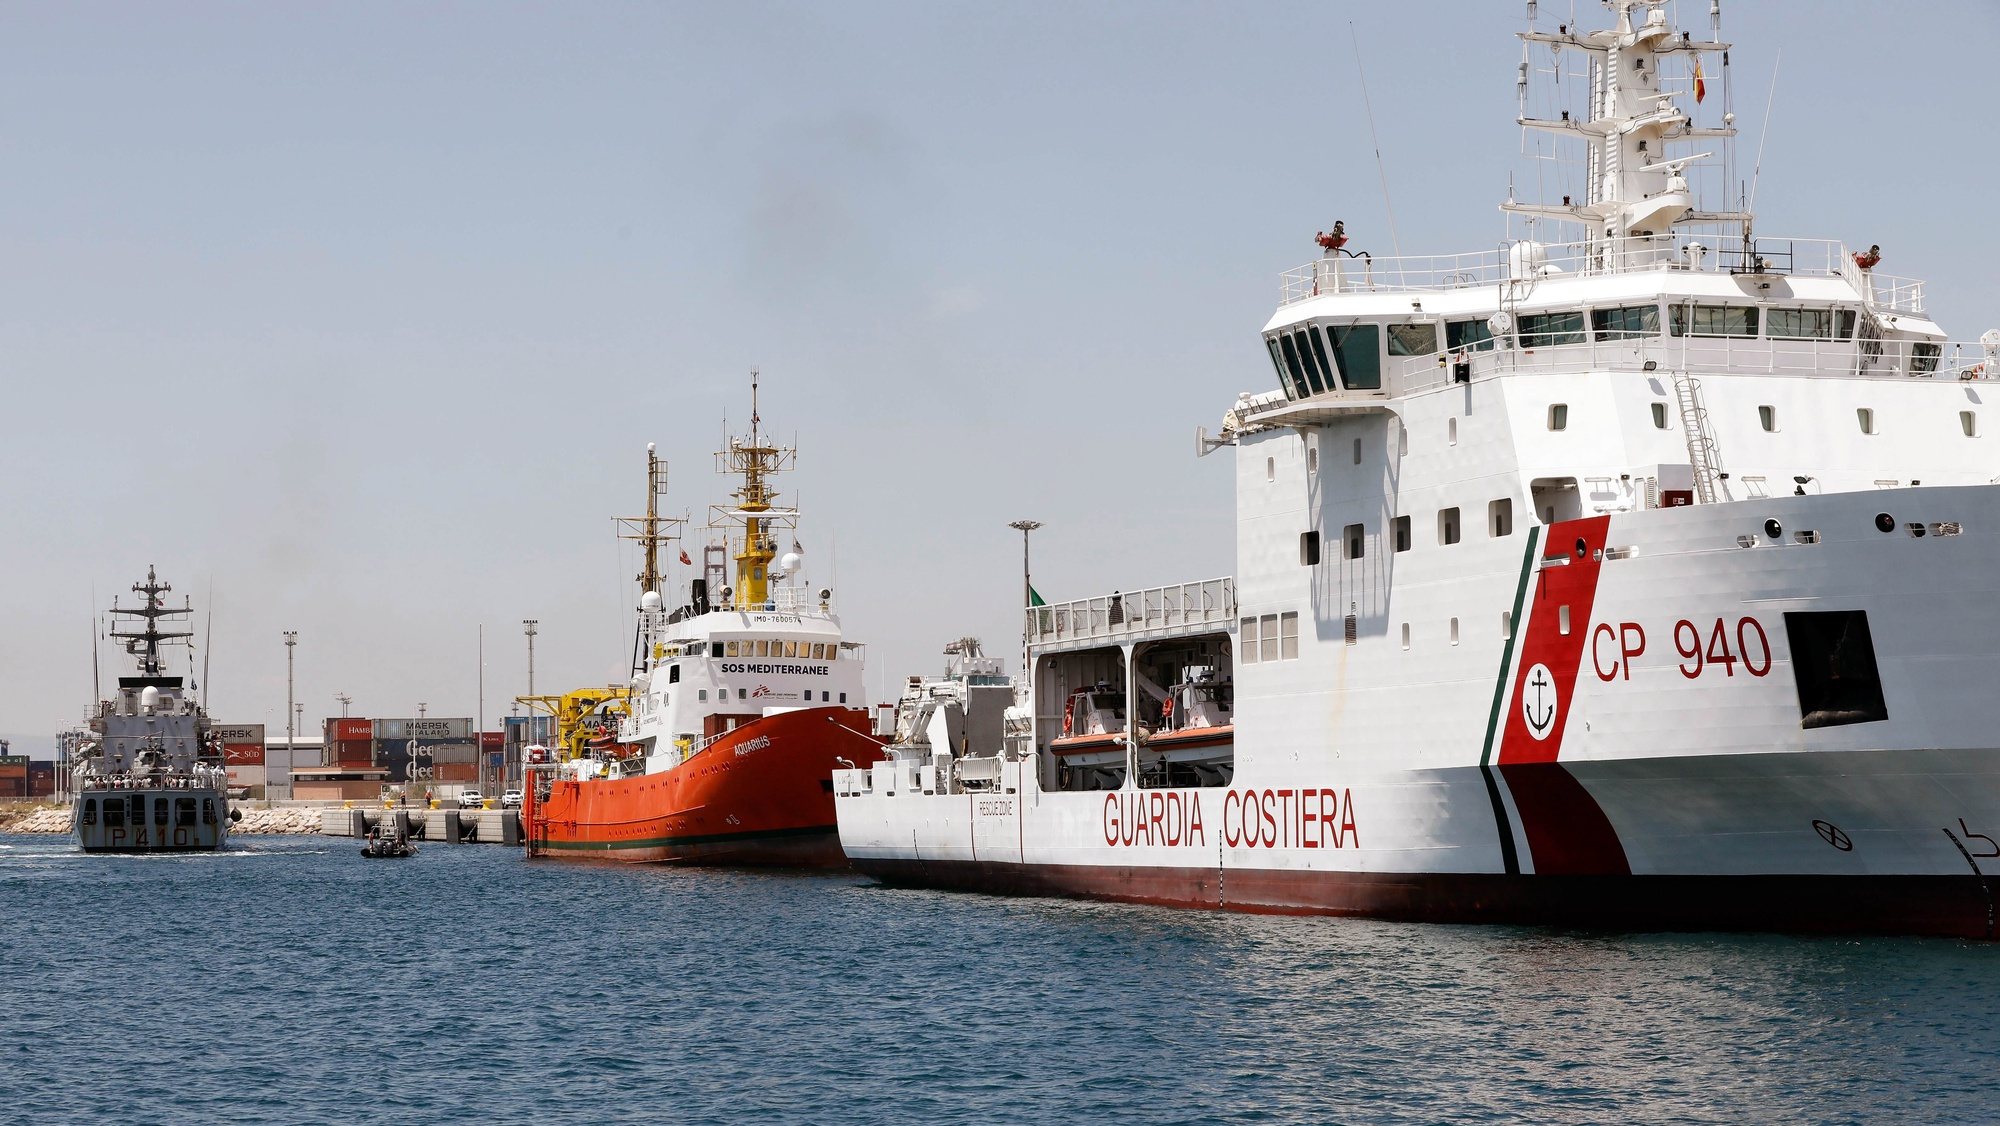 epa06815316 The Italian vessels &#039;Orione&#039; (L) and &#039;Dattilo&#039; (R) are seen at the port in Valencia, Spain, after escorting the rescue vessel &#039;Aquarius&#039; (C) to the Spanish coast, on 17 June 2018.The &#039;Aqarius&#039; rescue vessel of the European maritime-humanitarian organization &#039;SOS Mediterranee&#039; carrying some 630 migrants rescued in the Mediterranean off the Libyan coast has been heading to Spain after both, Malta and Italy, had refused the ship to enter either country&#039;s ports.  EPA/JUAN CARLOS CARDENAS